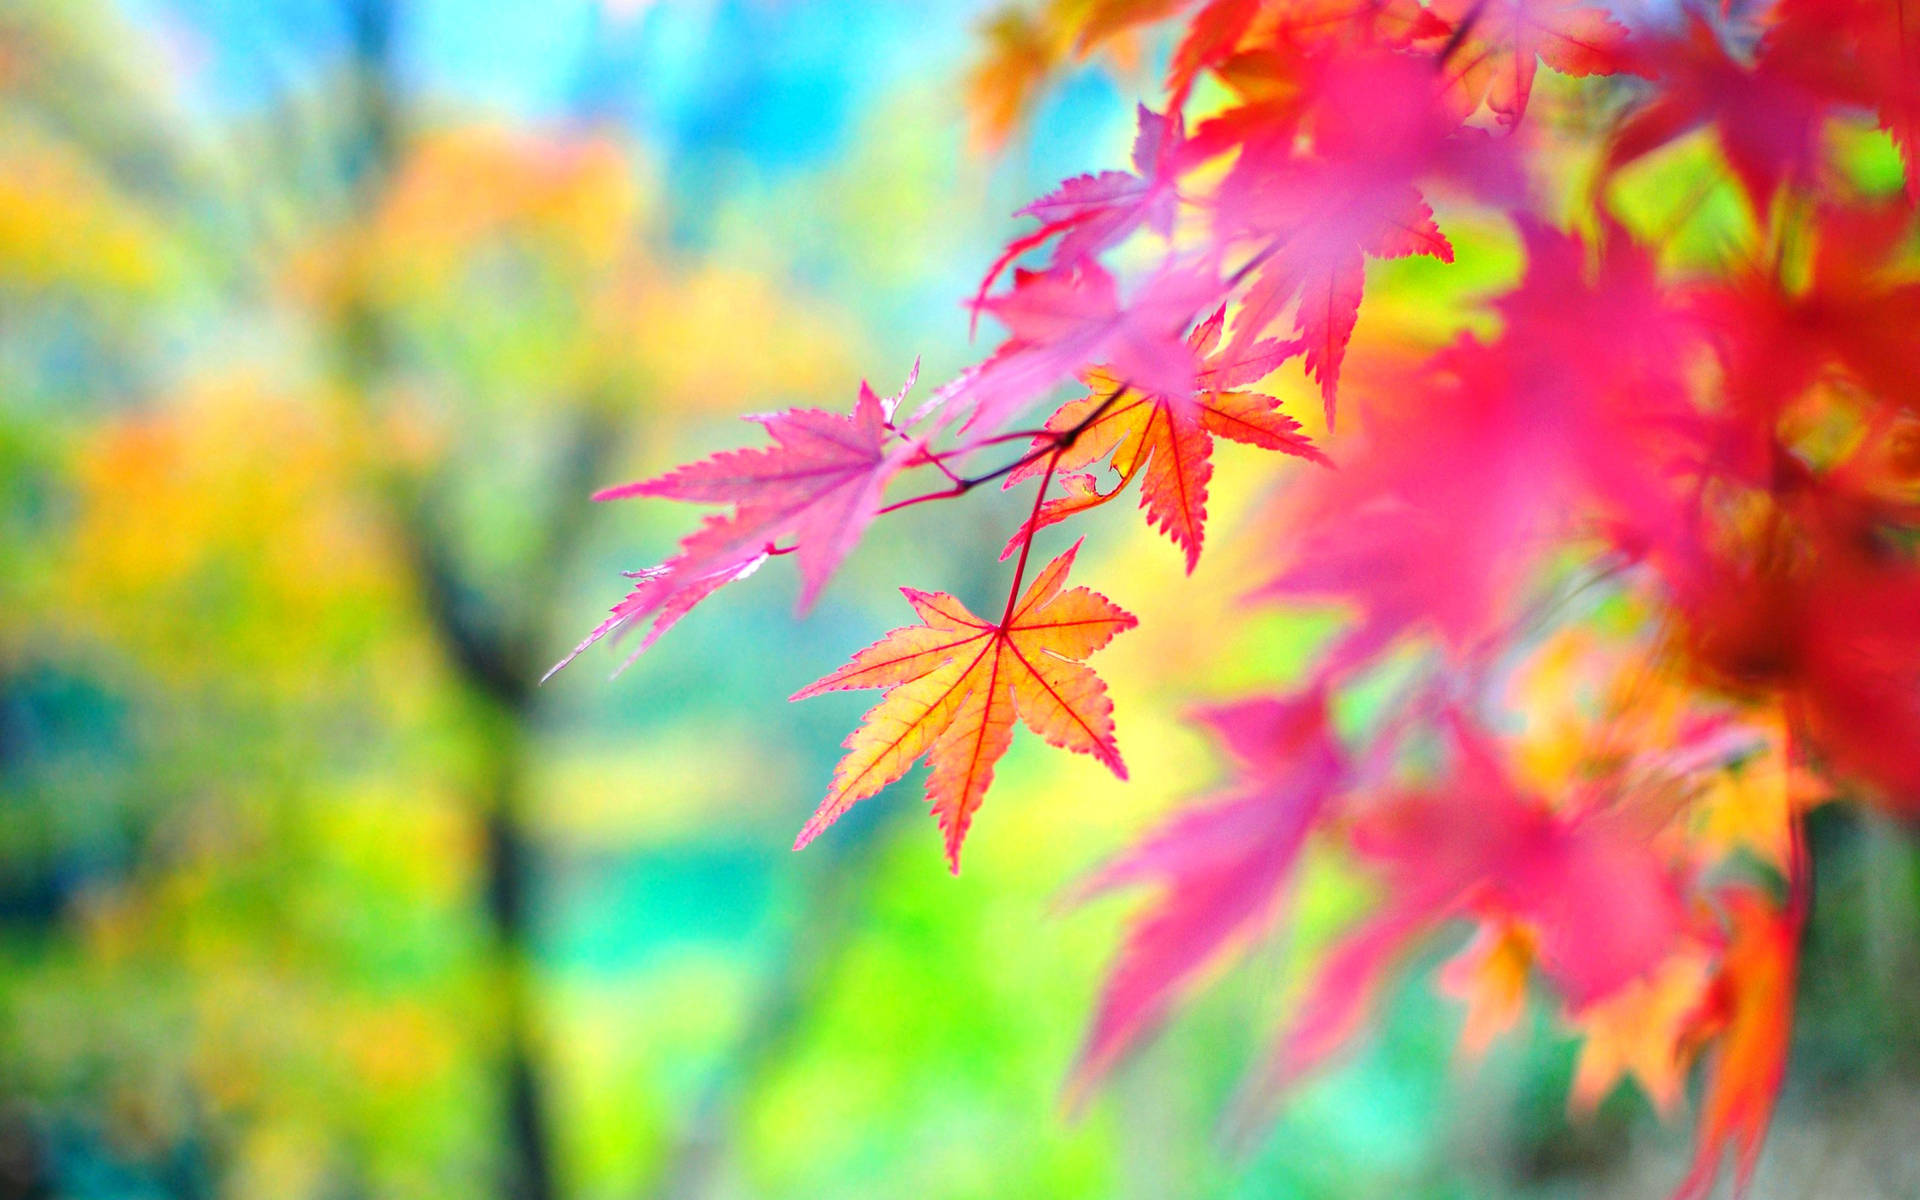 Captivating Autumn Scenery With Pink Leaves